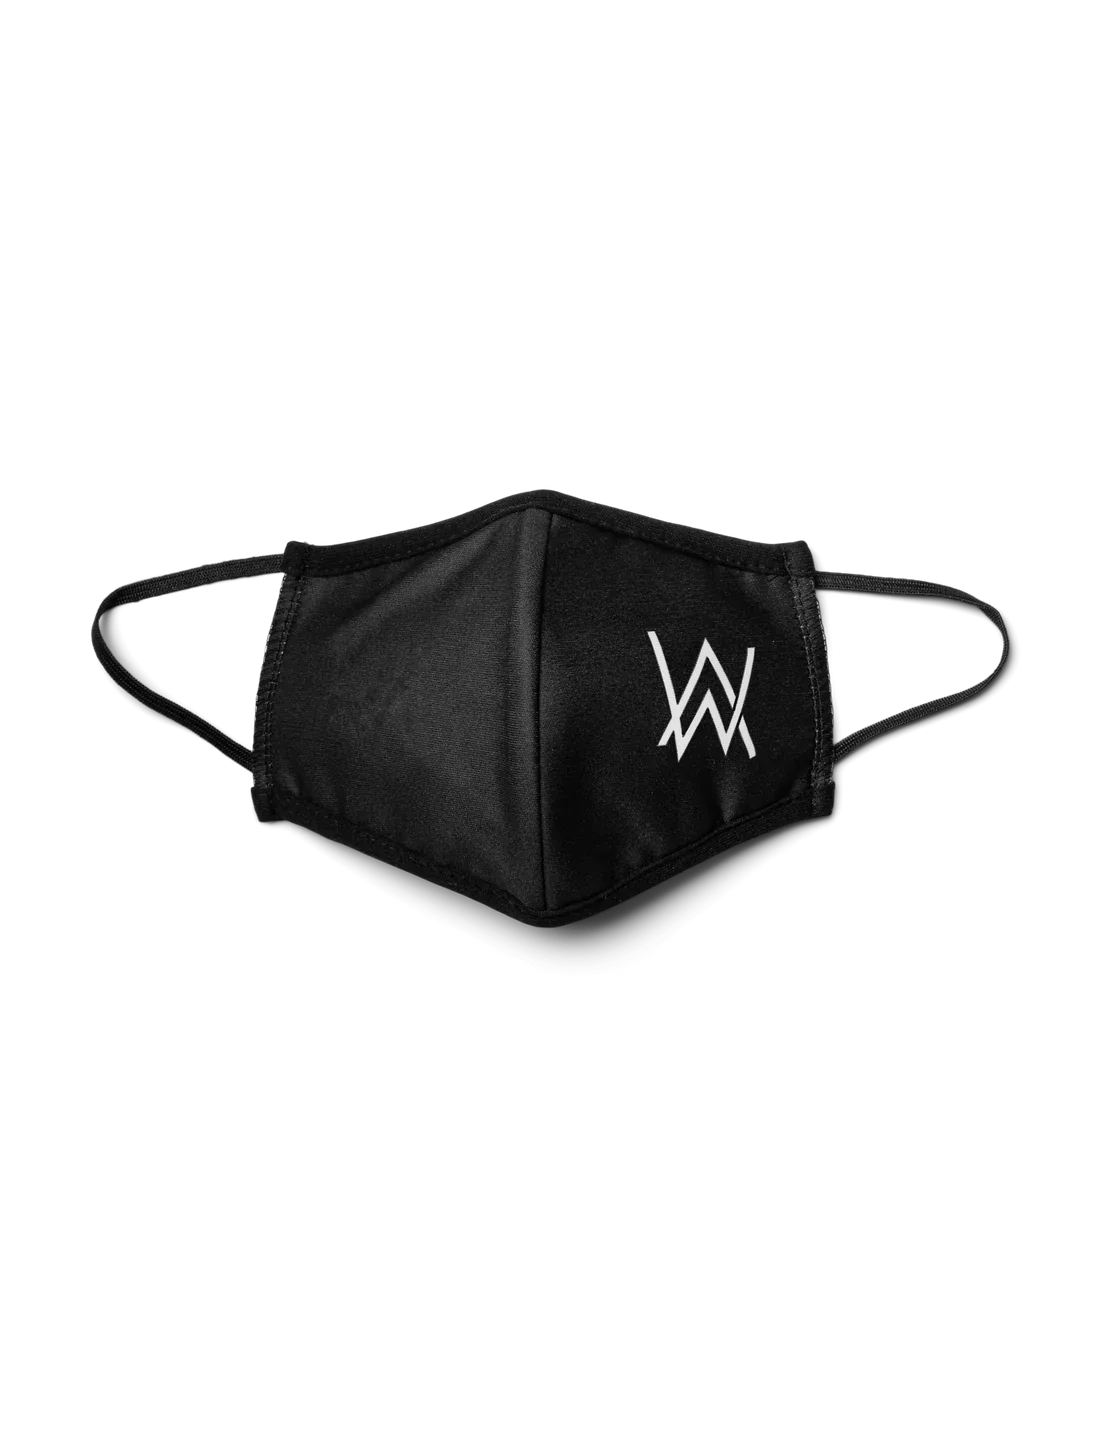 Alan Walker Core Logo Face Mask in black featuring the 'AW' logo in white, crafted with contoured fabric design and elastic ear straps, set against a dark background.